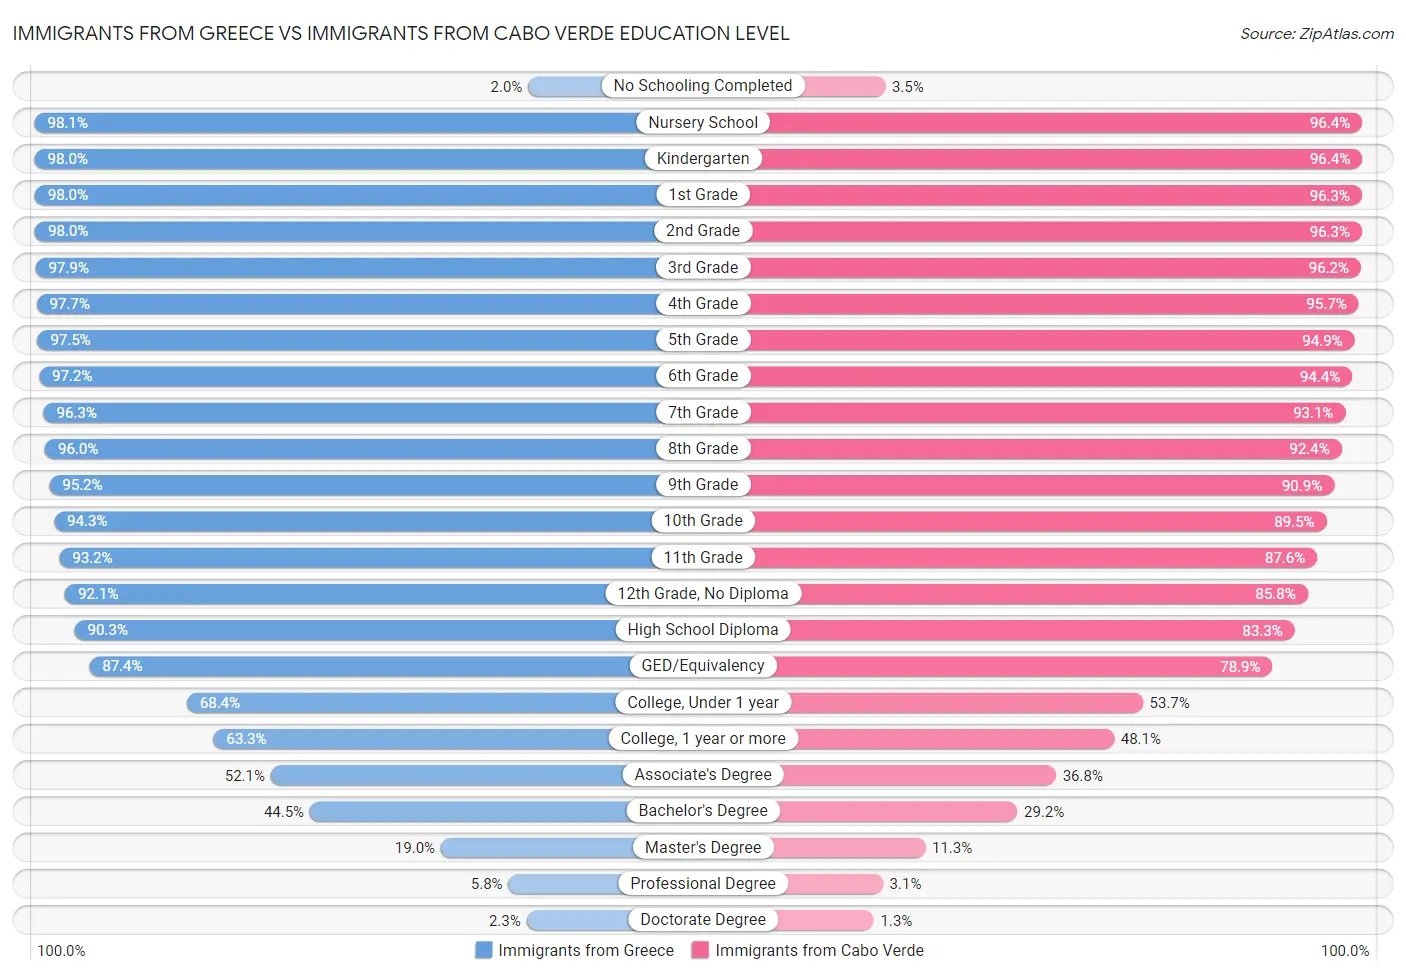 Immigrants from Greece vs Immigrants from Cabo Verde Education Level